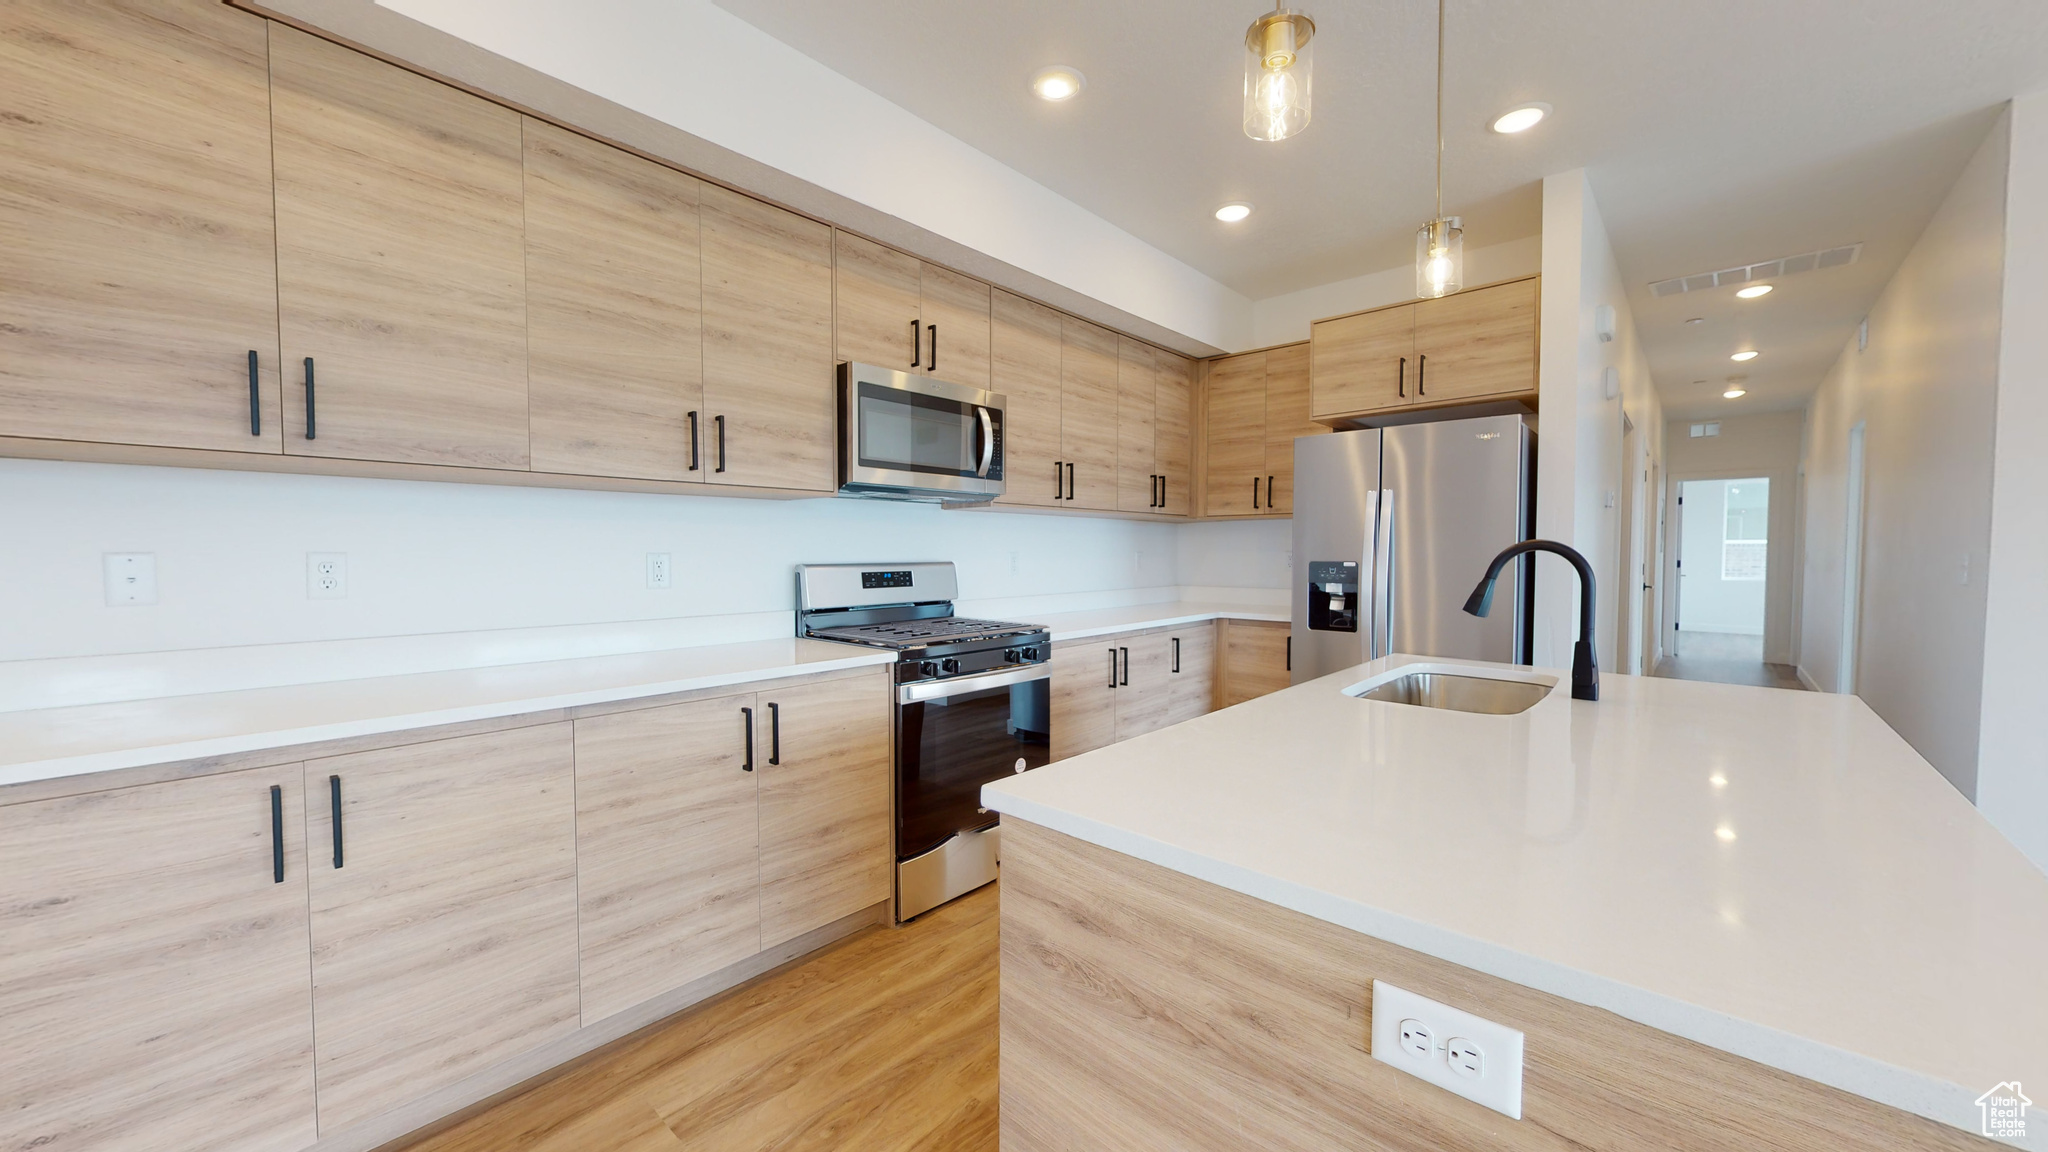 Kitchen with decorative light fixtures, appliances with stainless steel finishes, light hardwood / wood-style flooring, an island with sink, and sink